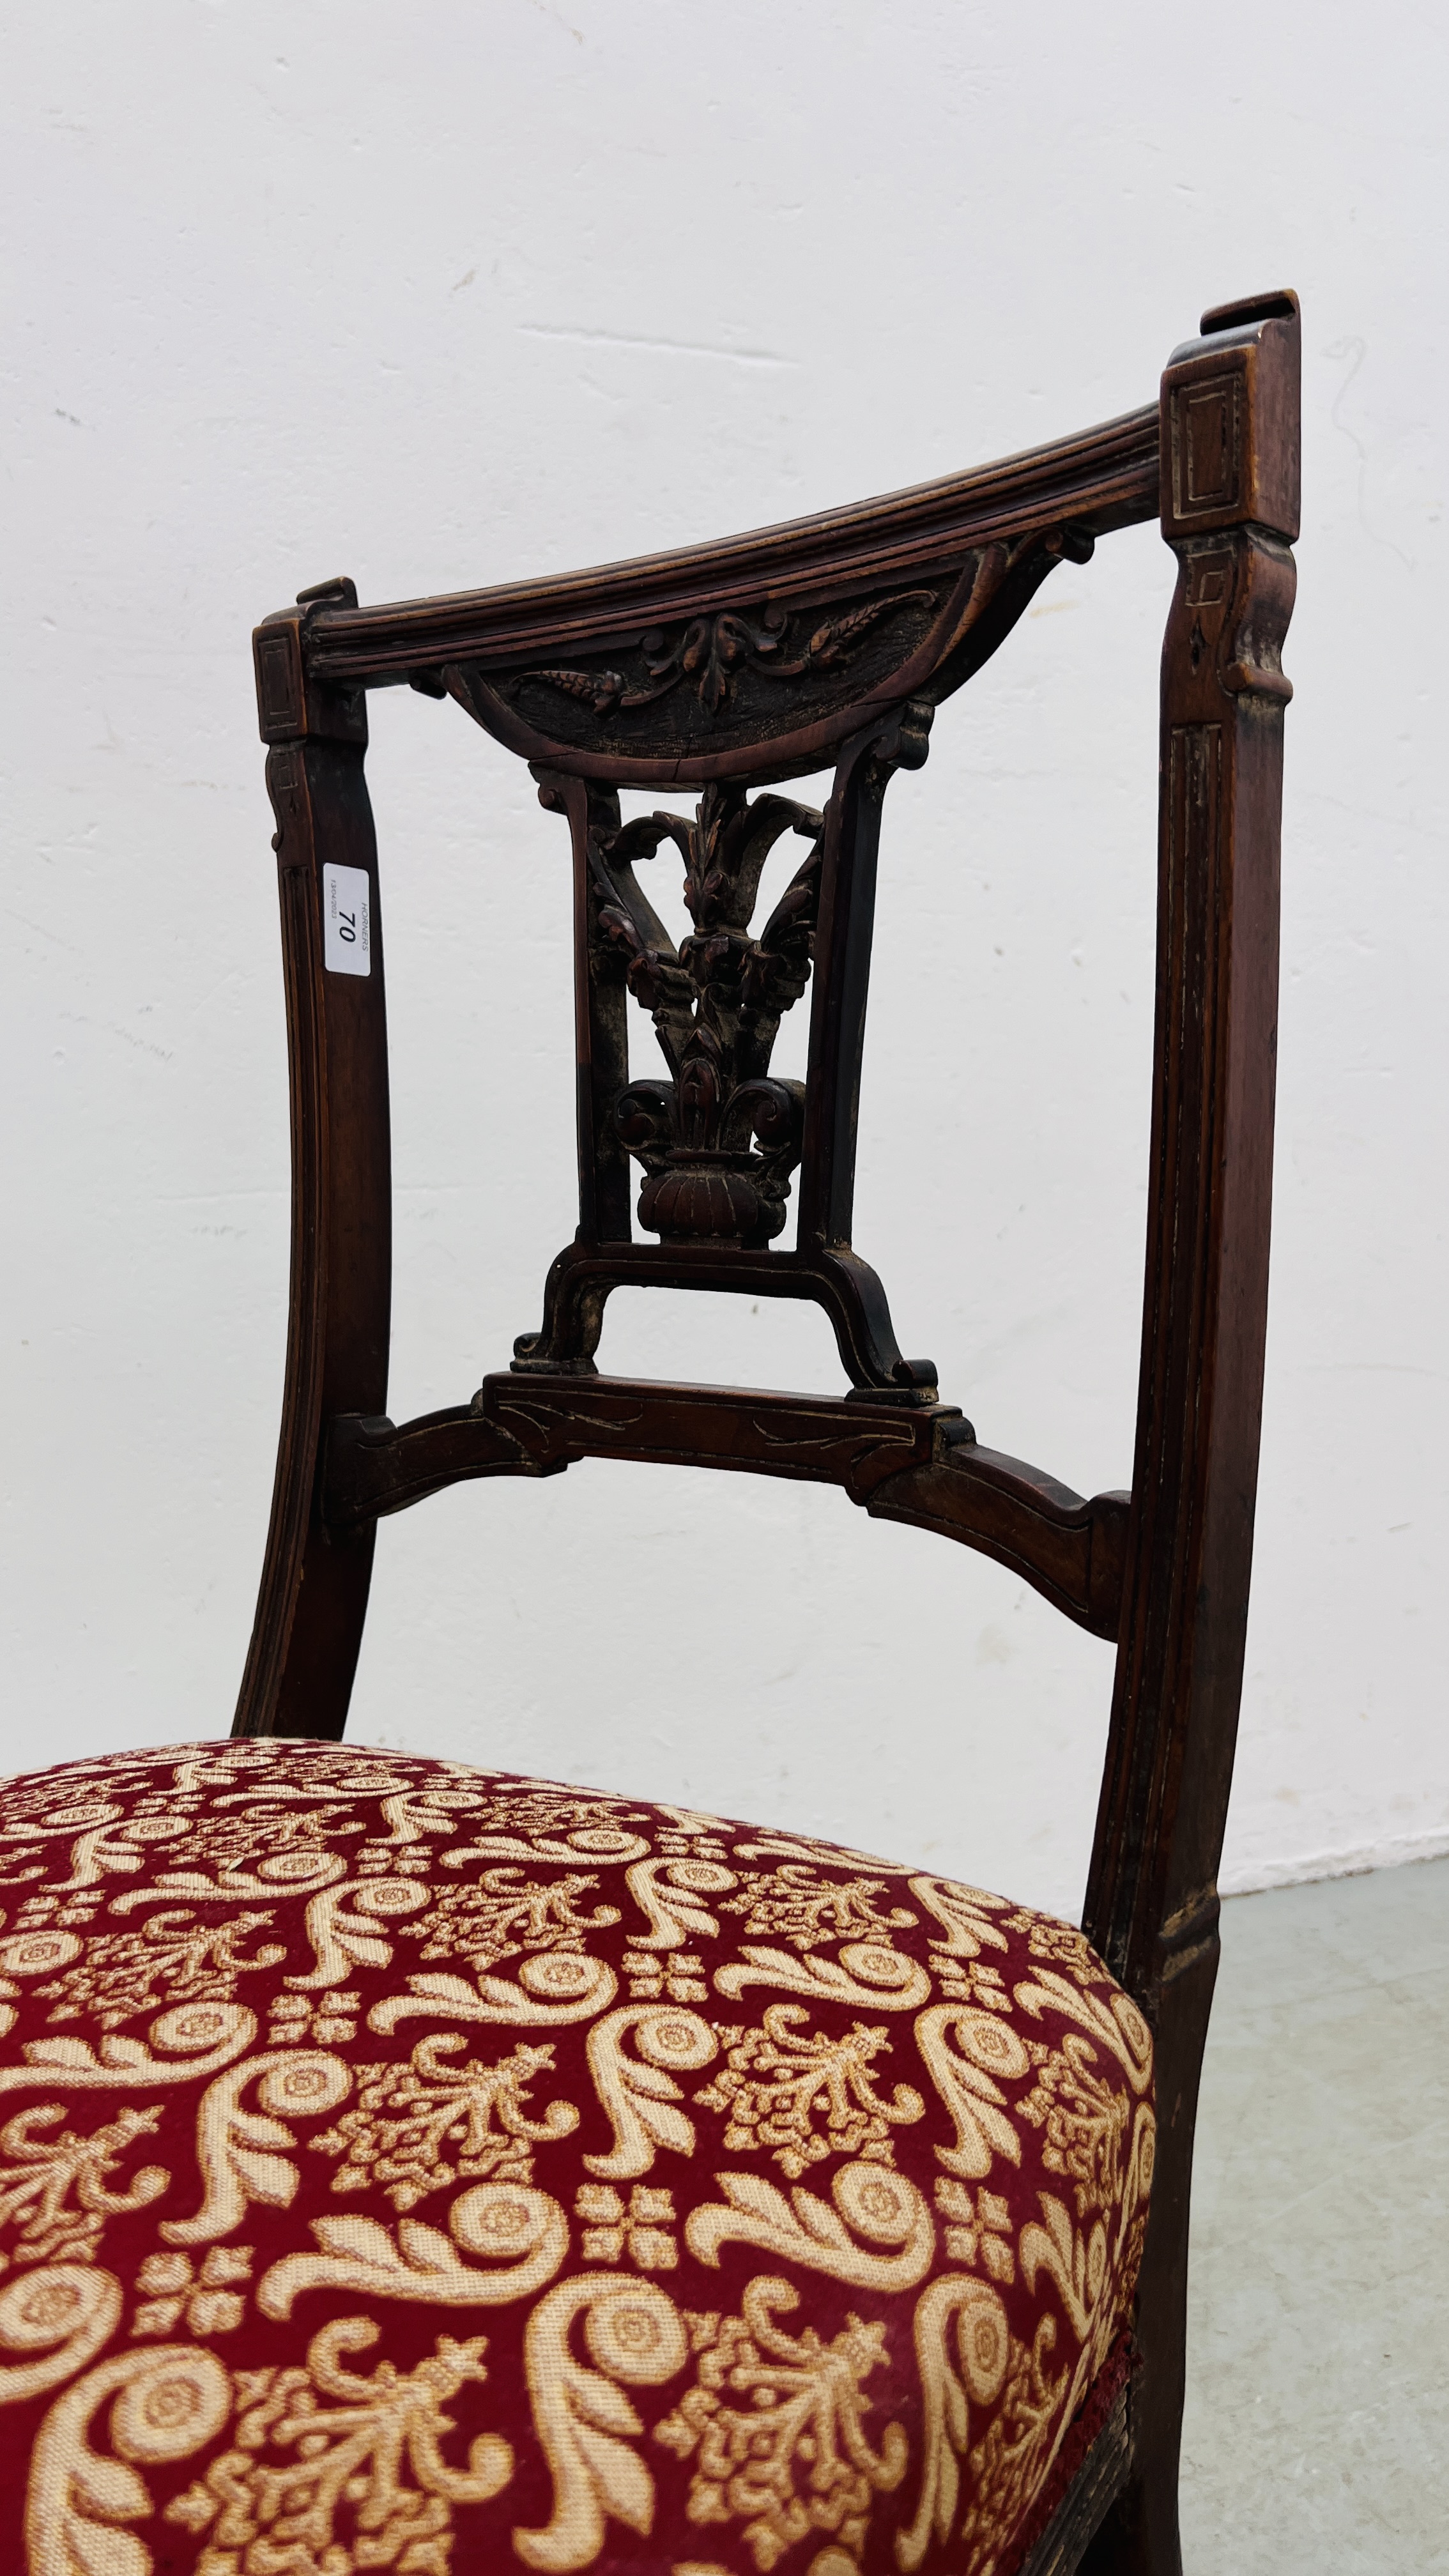 AN EDWARDIAN BEDROOM CHAIR WITH CARVED DETAILING AND UPHOLSTERED SEAT. - Image 2 of 6